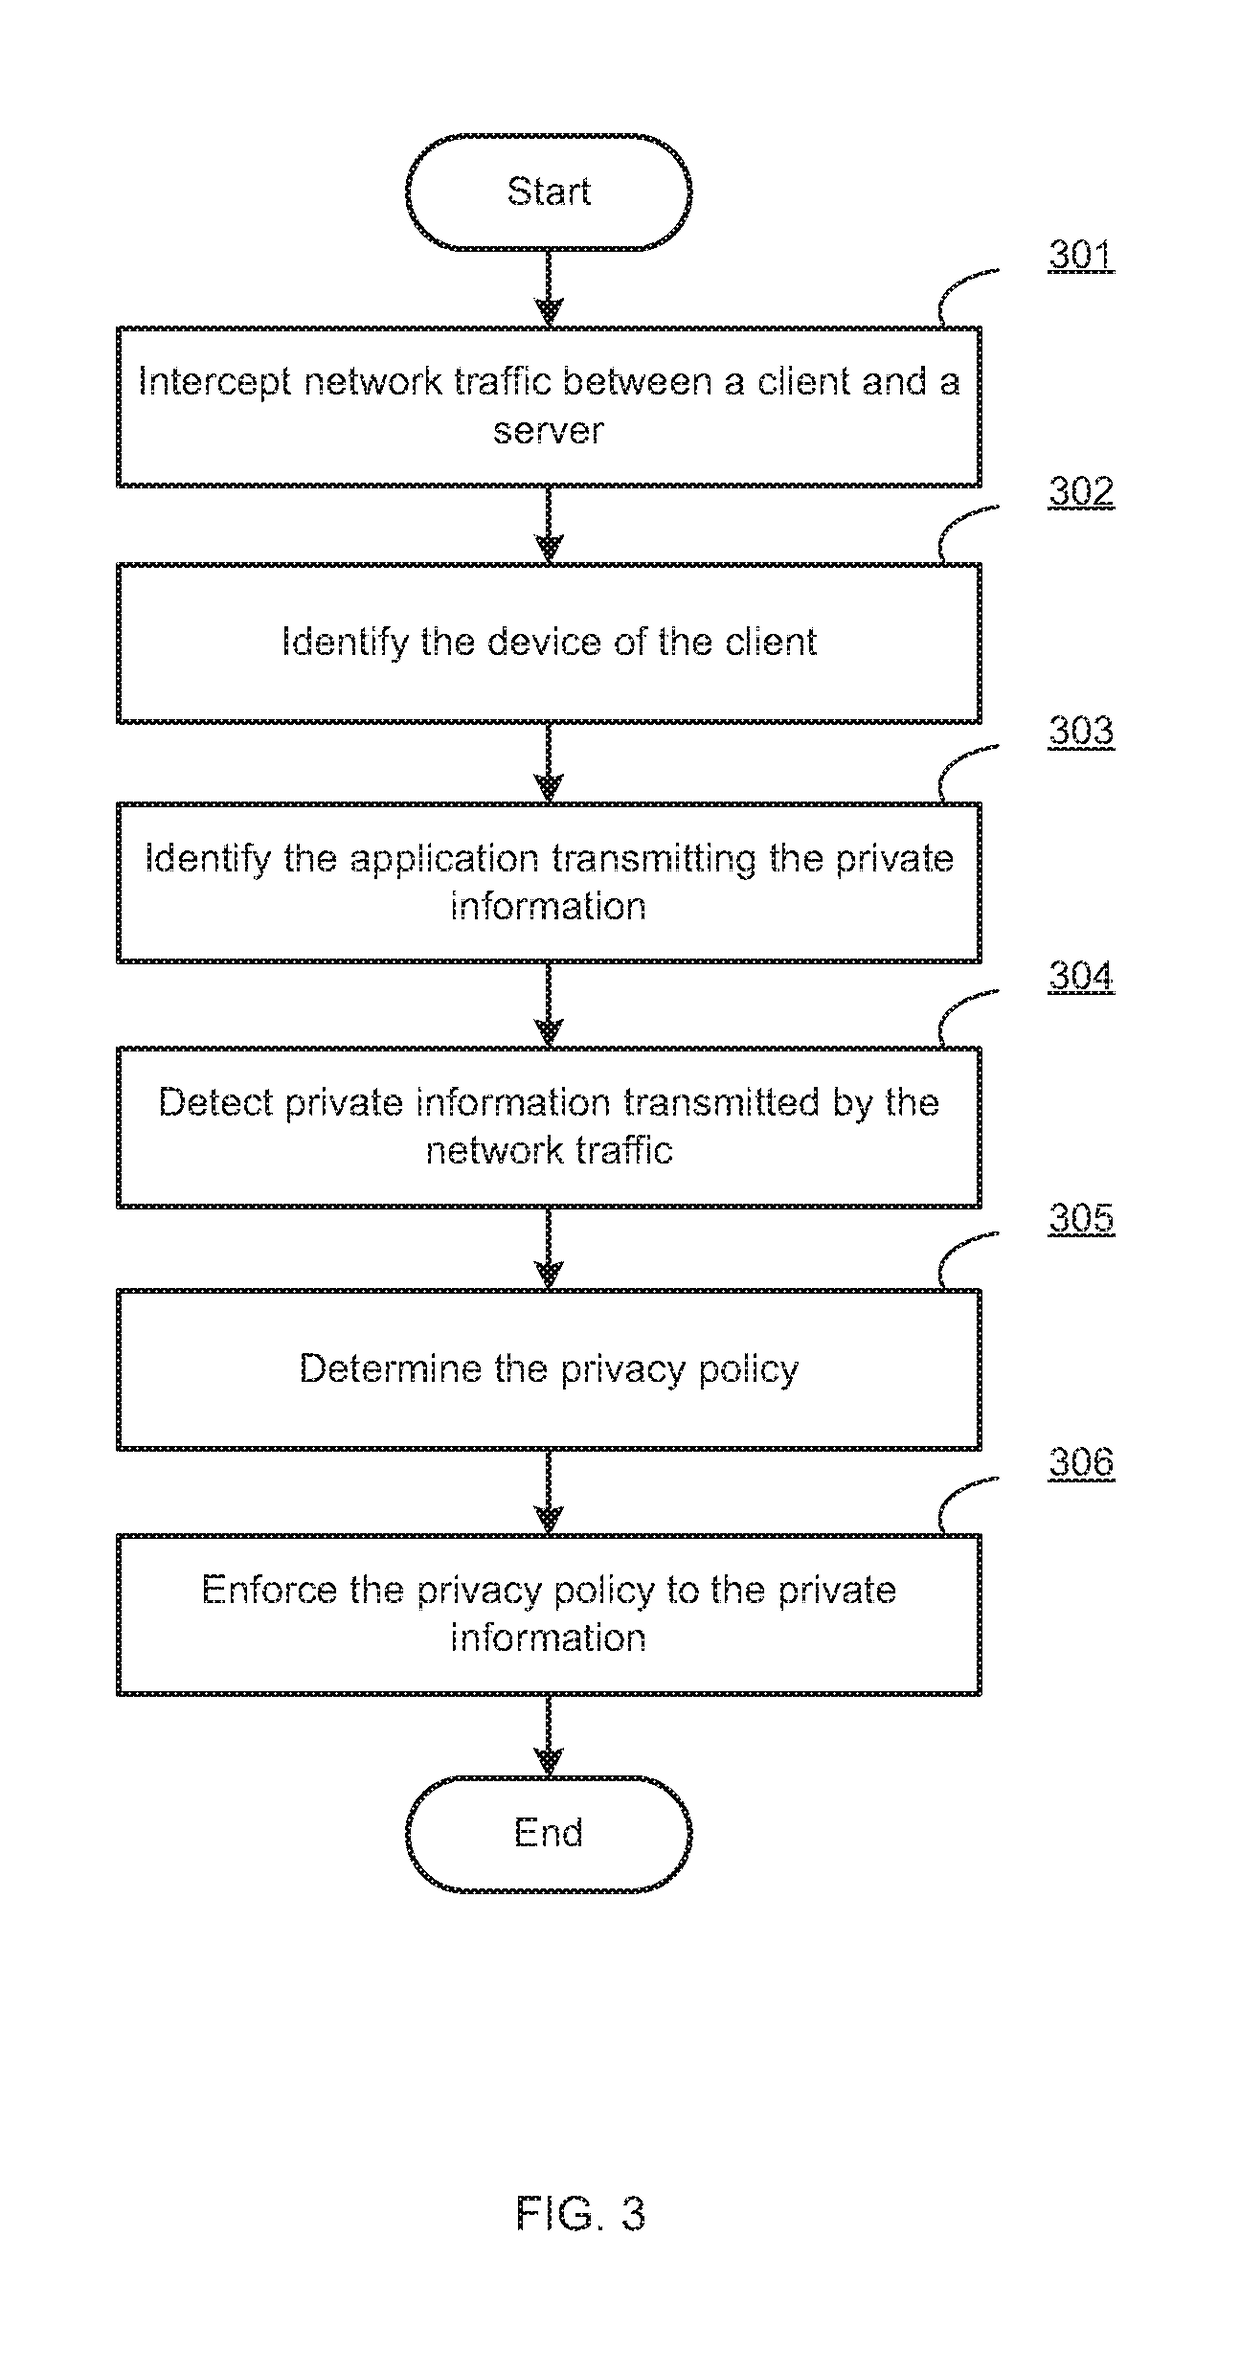 Centralized management and enforcement of online privacy policies